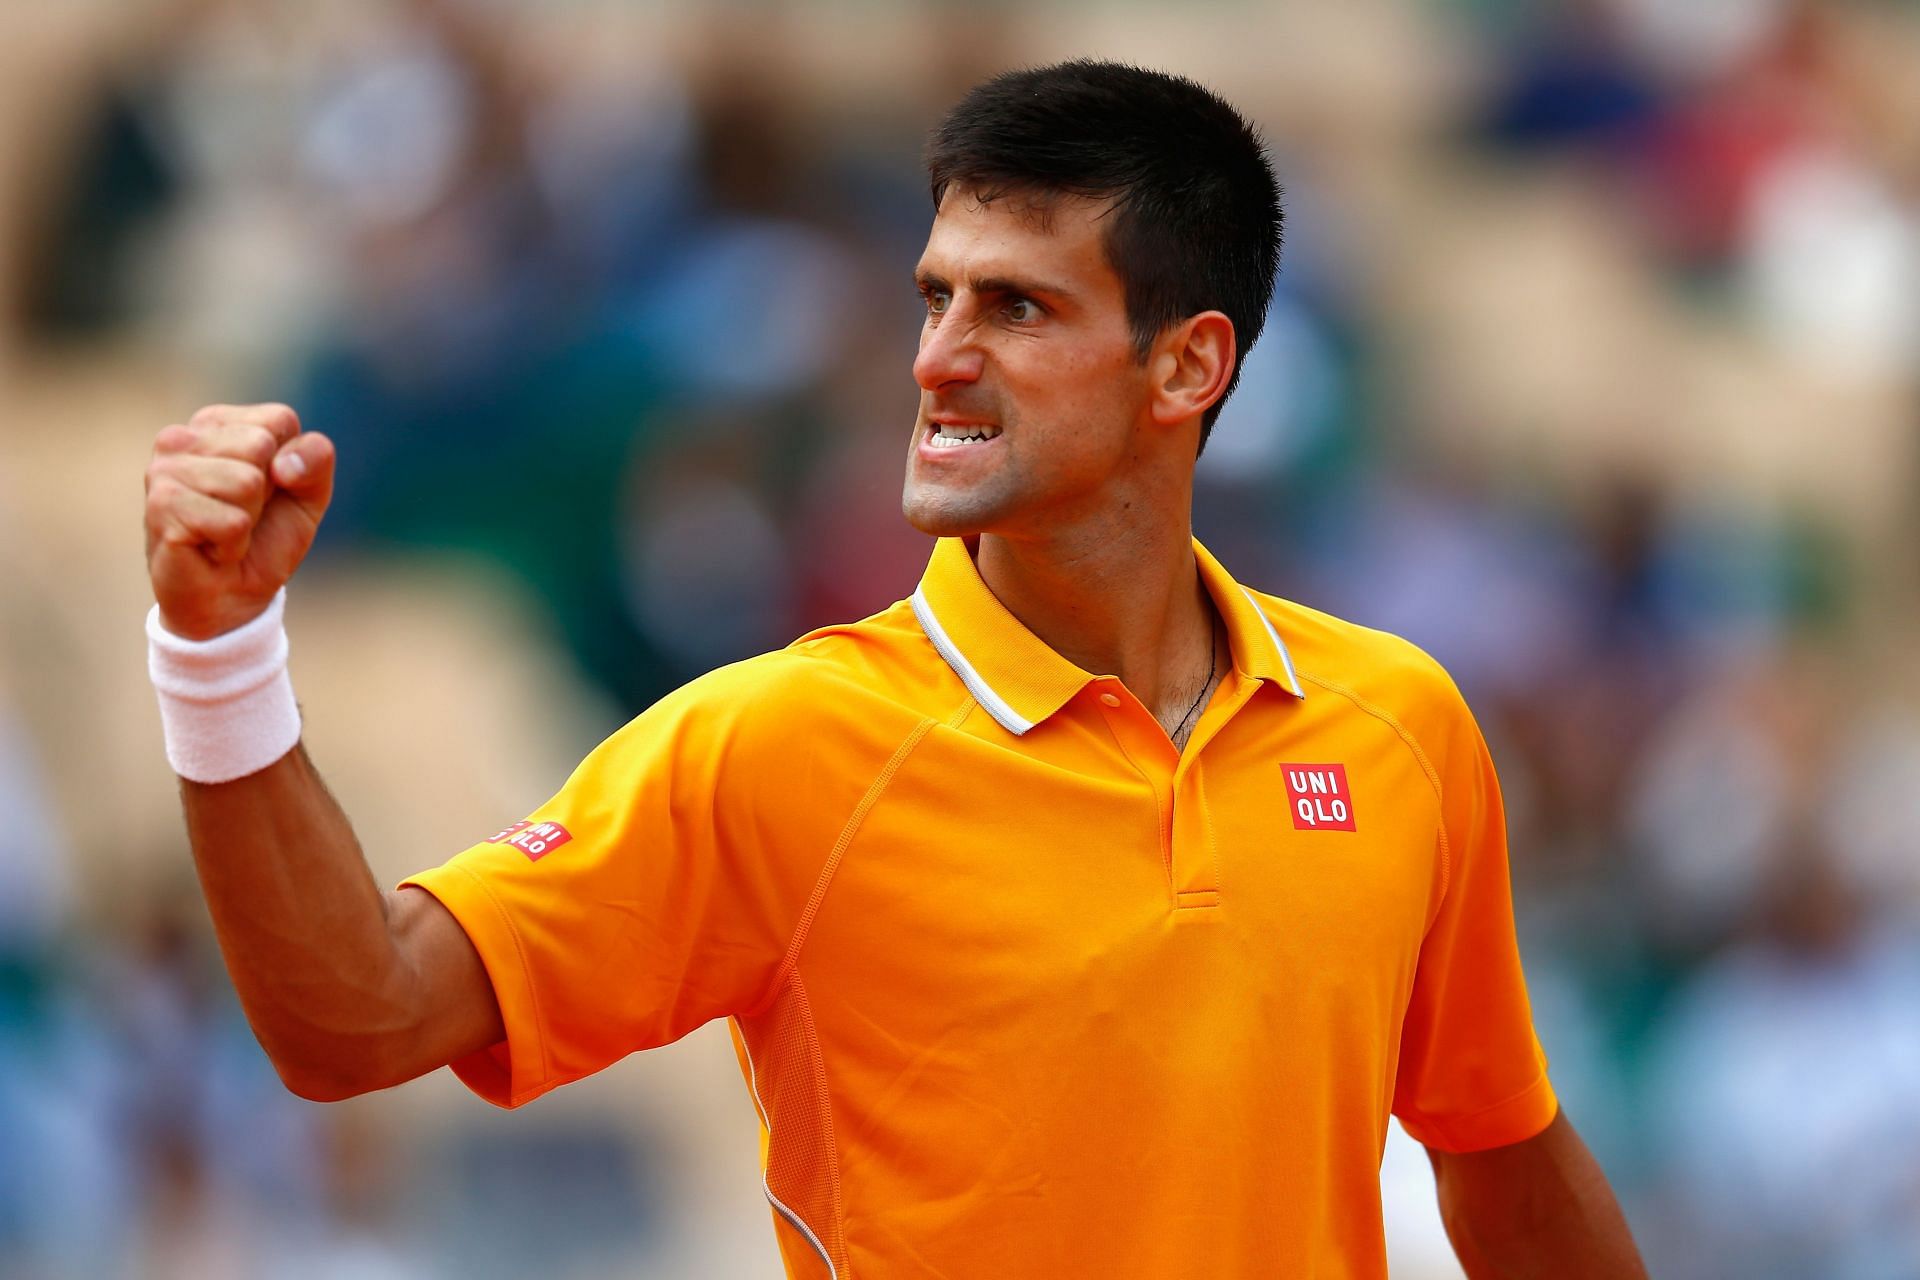 Novak Djokovic will return to action at the Monte-Carlo Masters